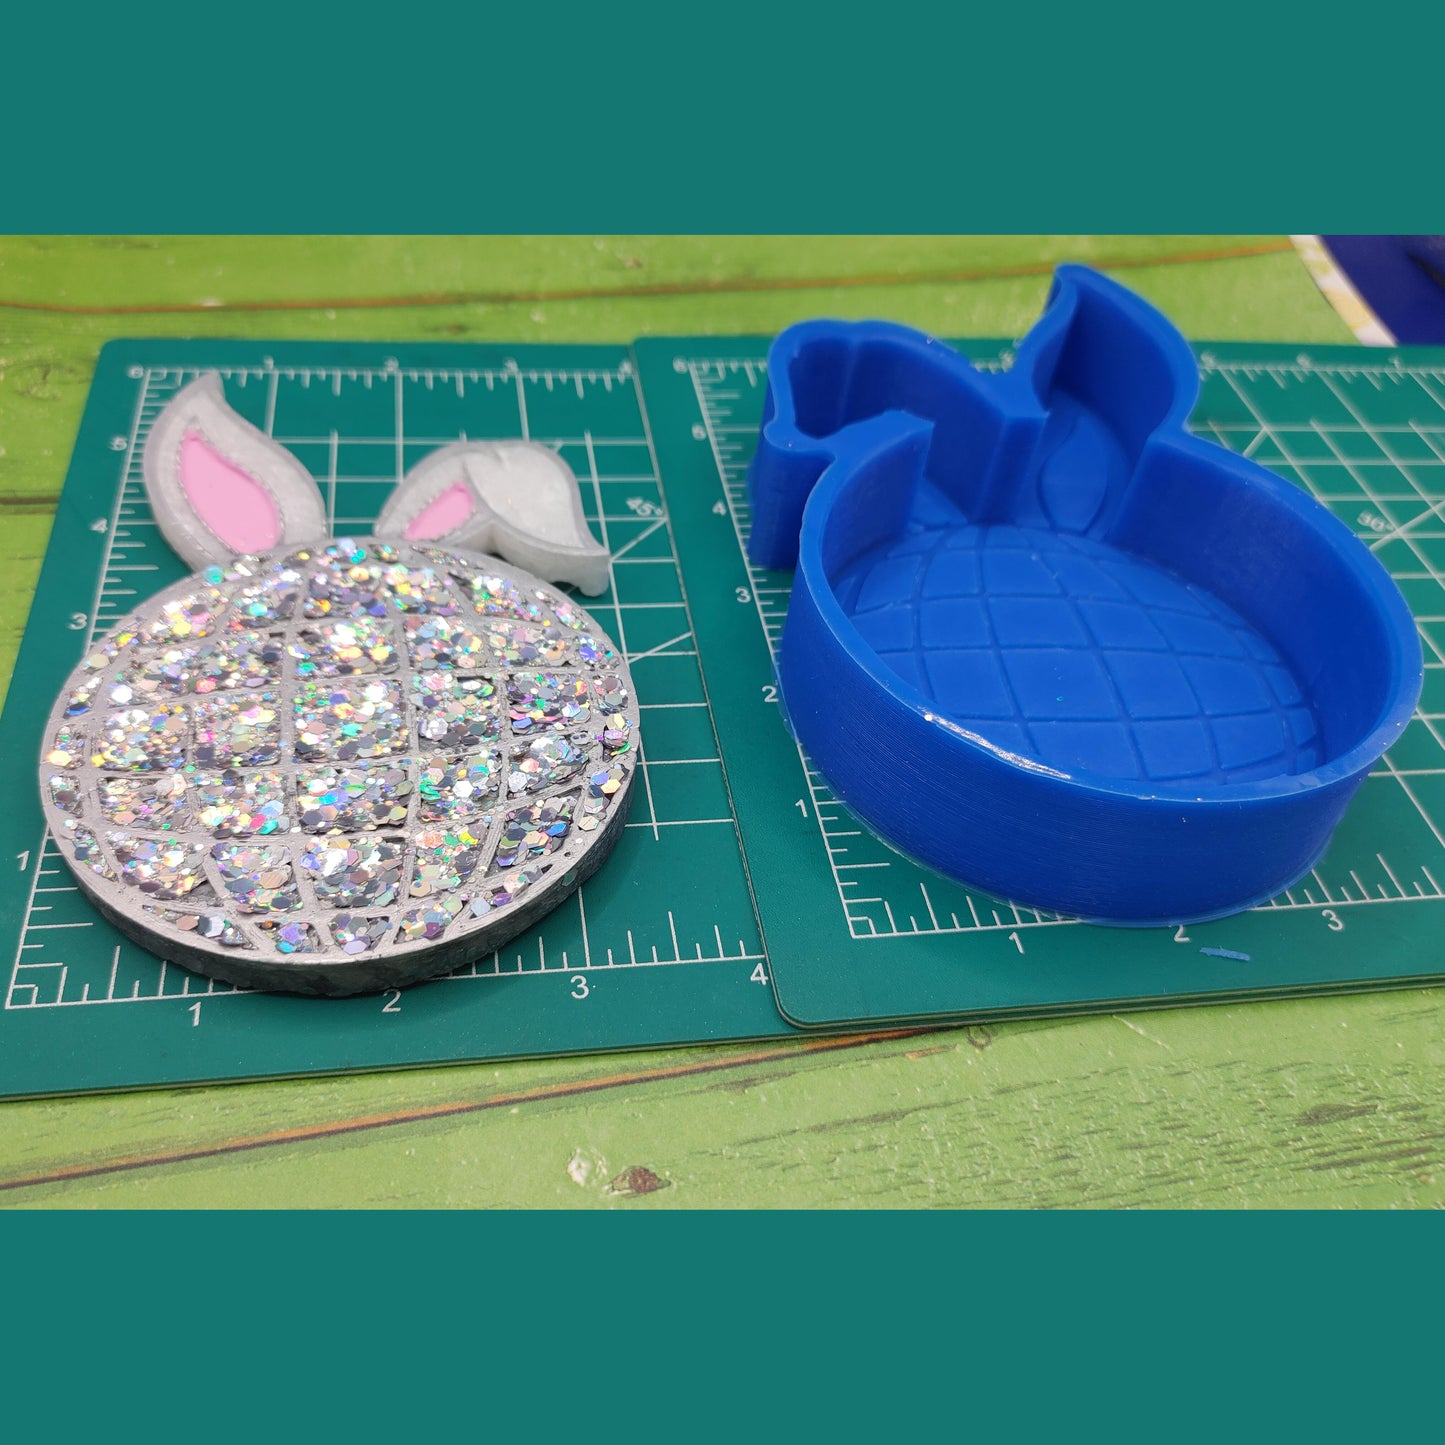 Disco Ball with bunny ears - Silicone freshie mold